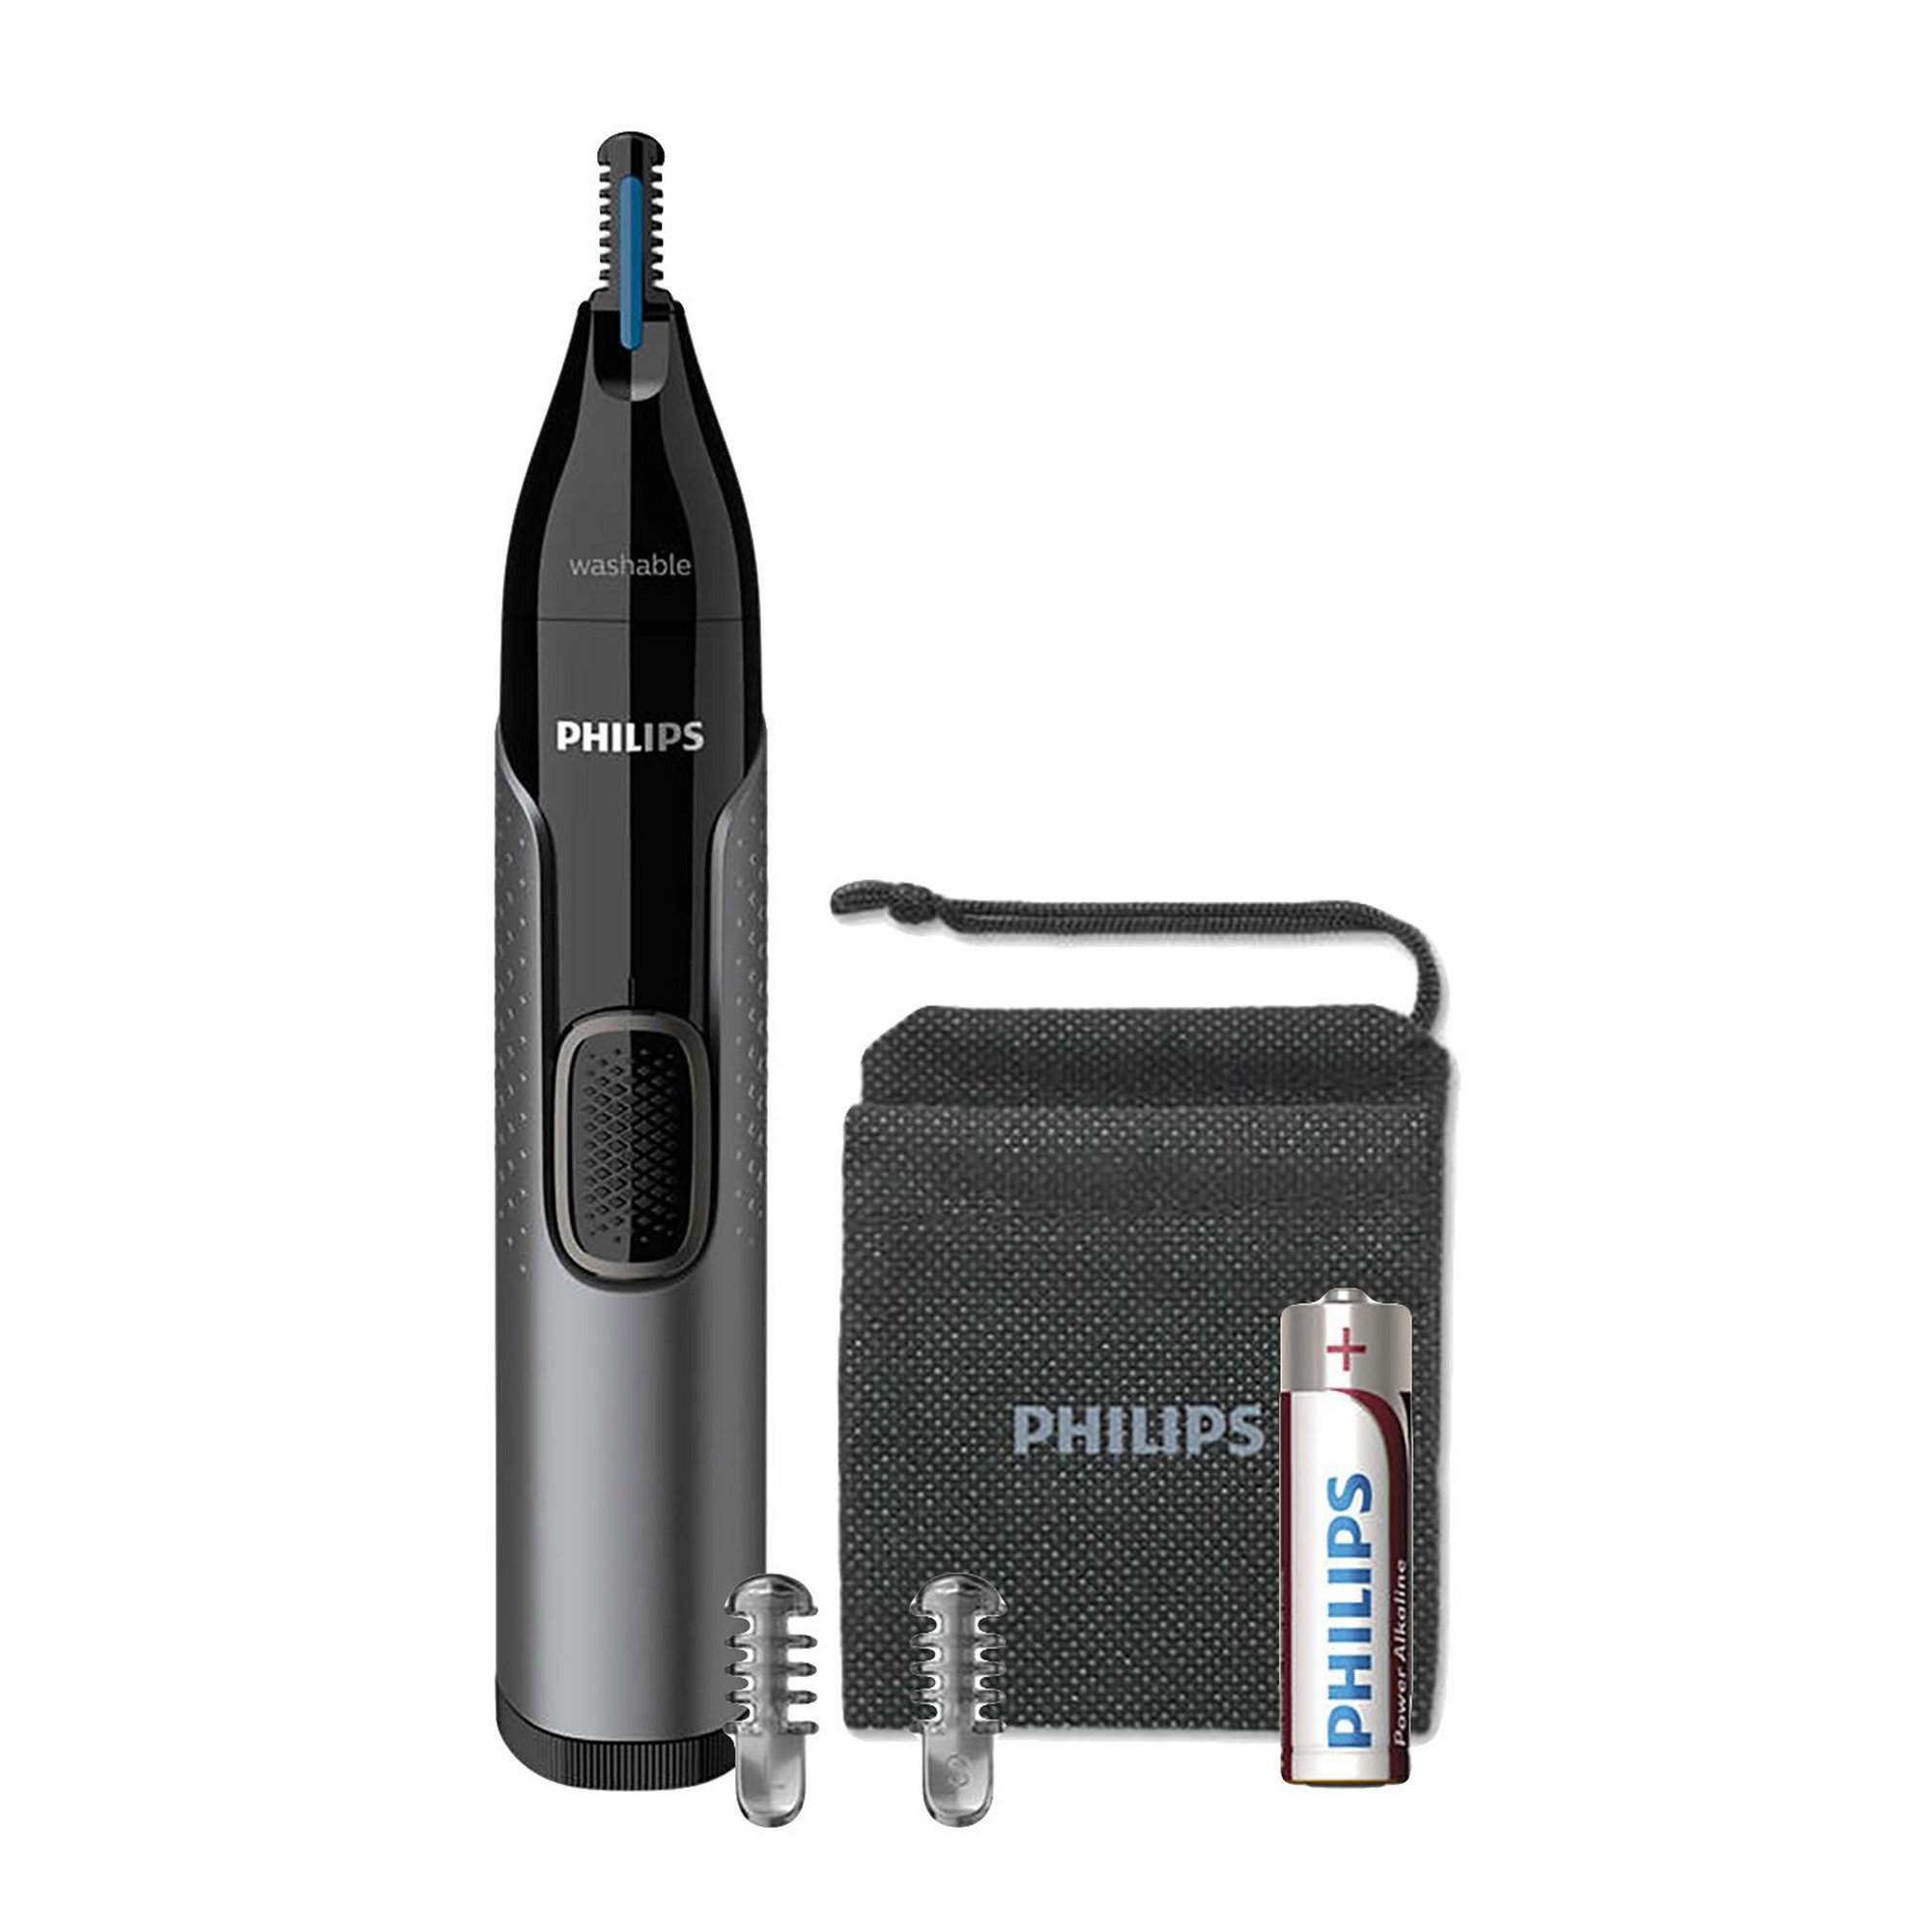 Philips Nose and Ear Trimmer with Protective Guard